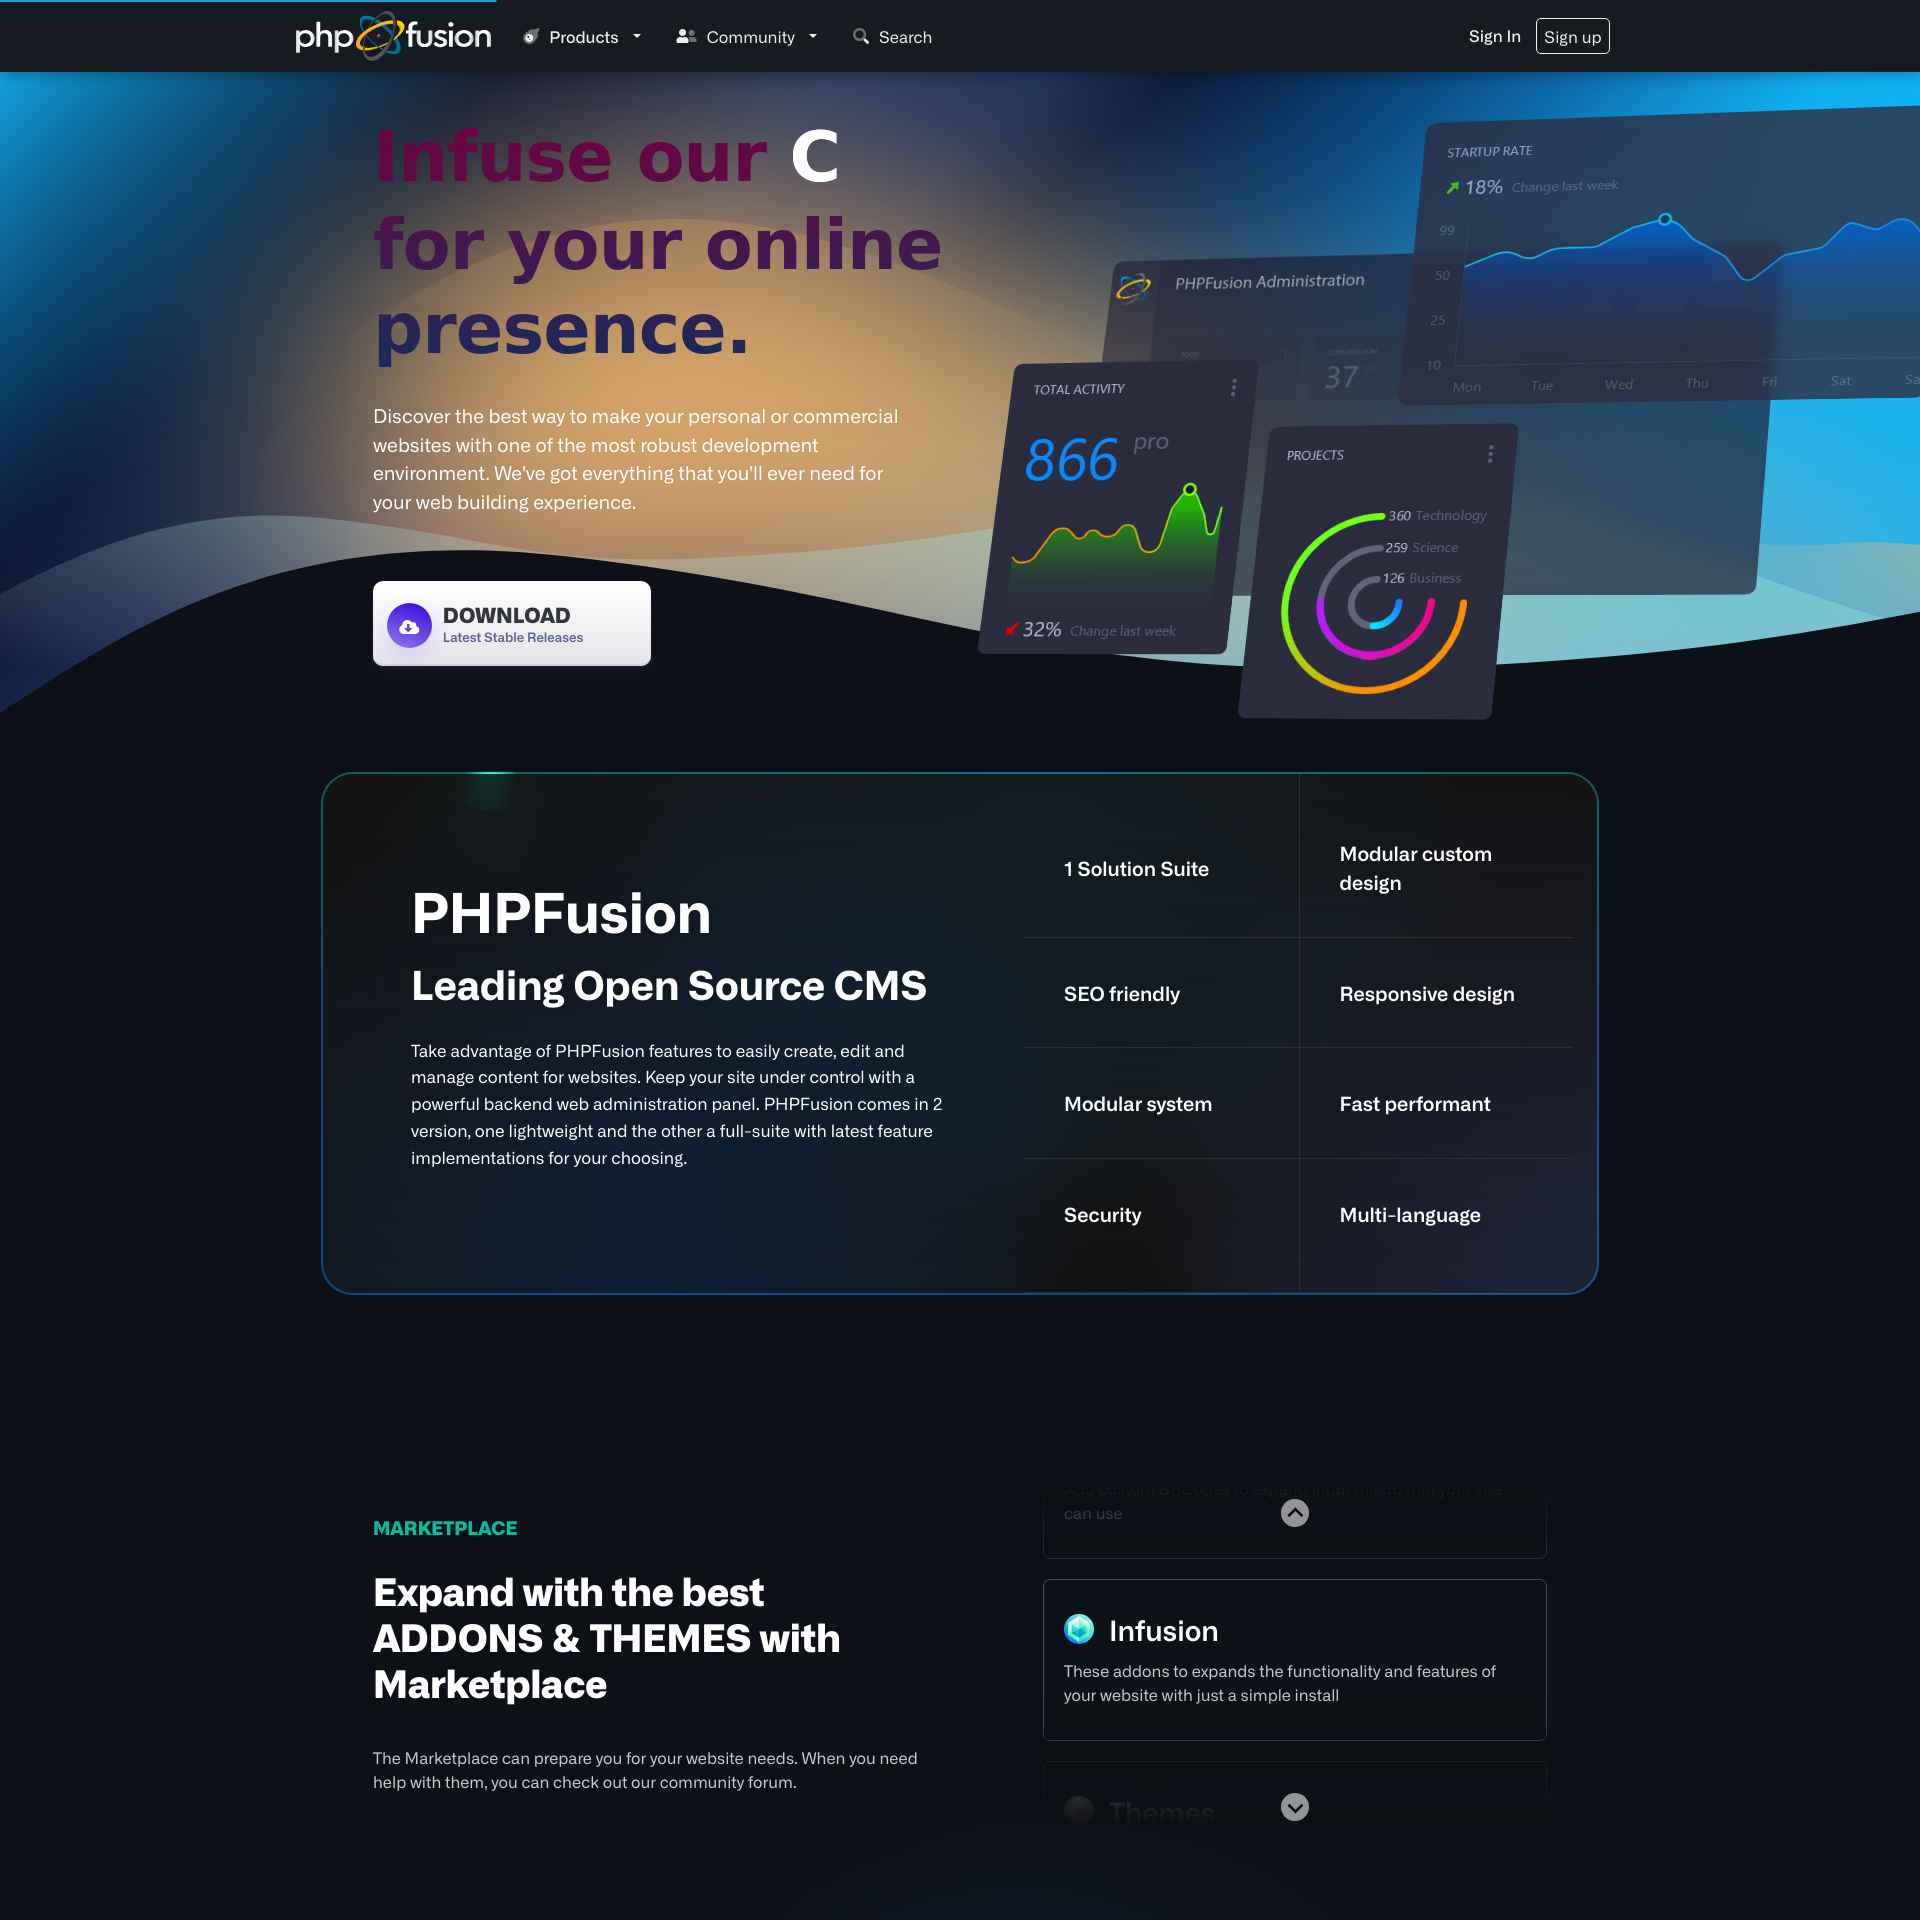 Introducing PHP-Fusion: A Reliable Website Framework for All